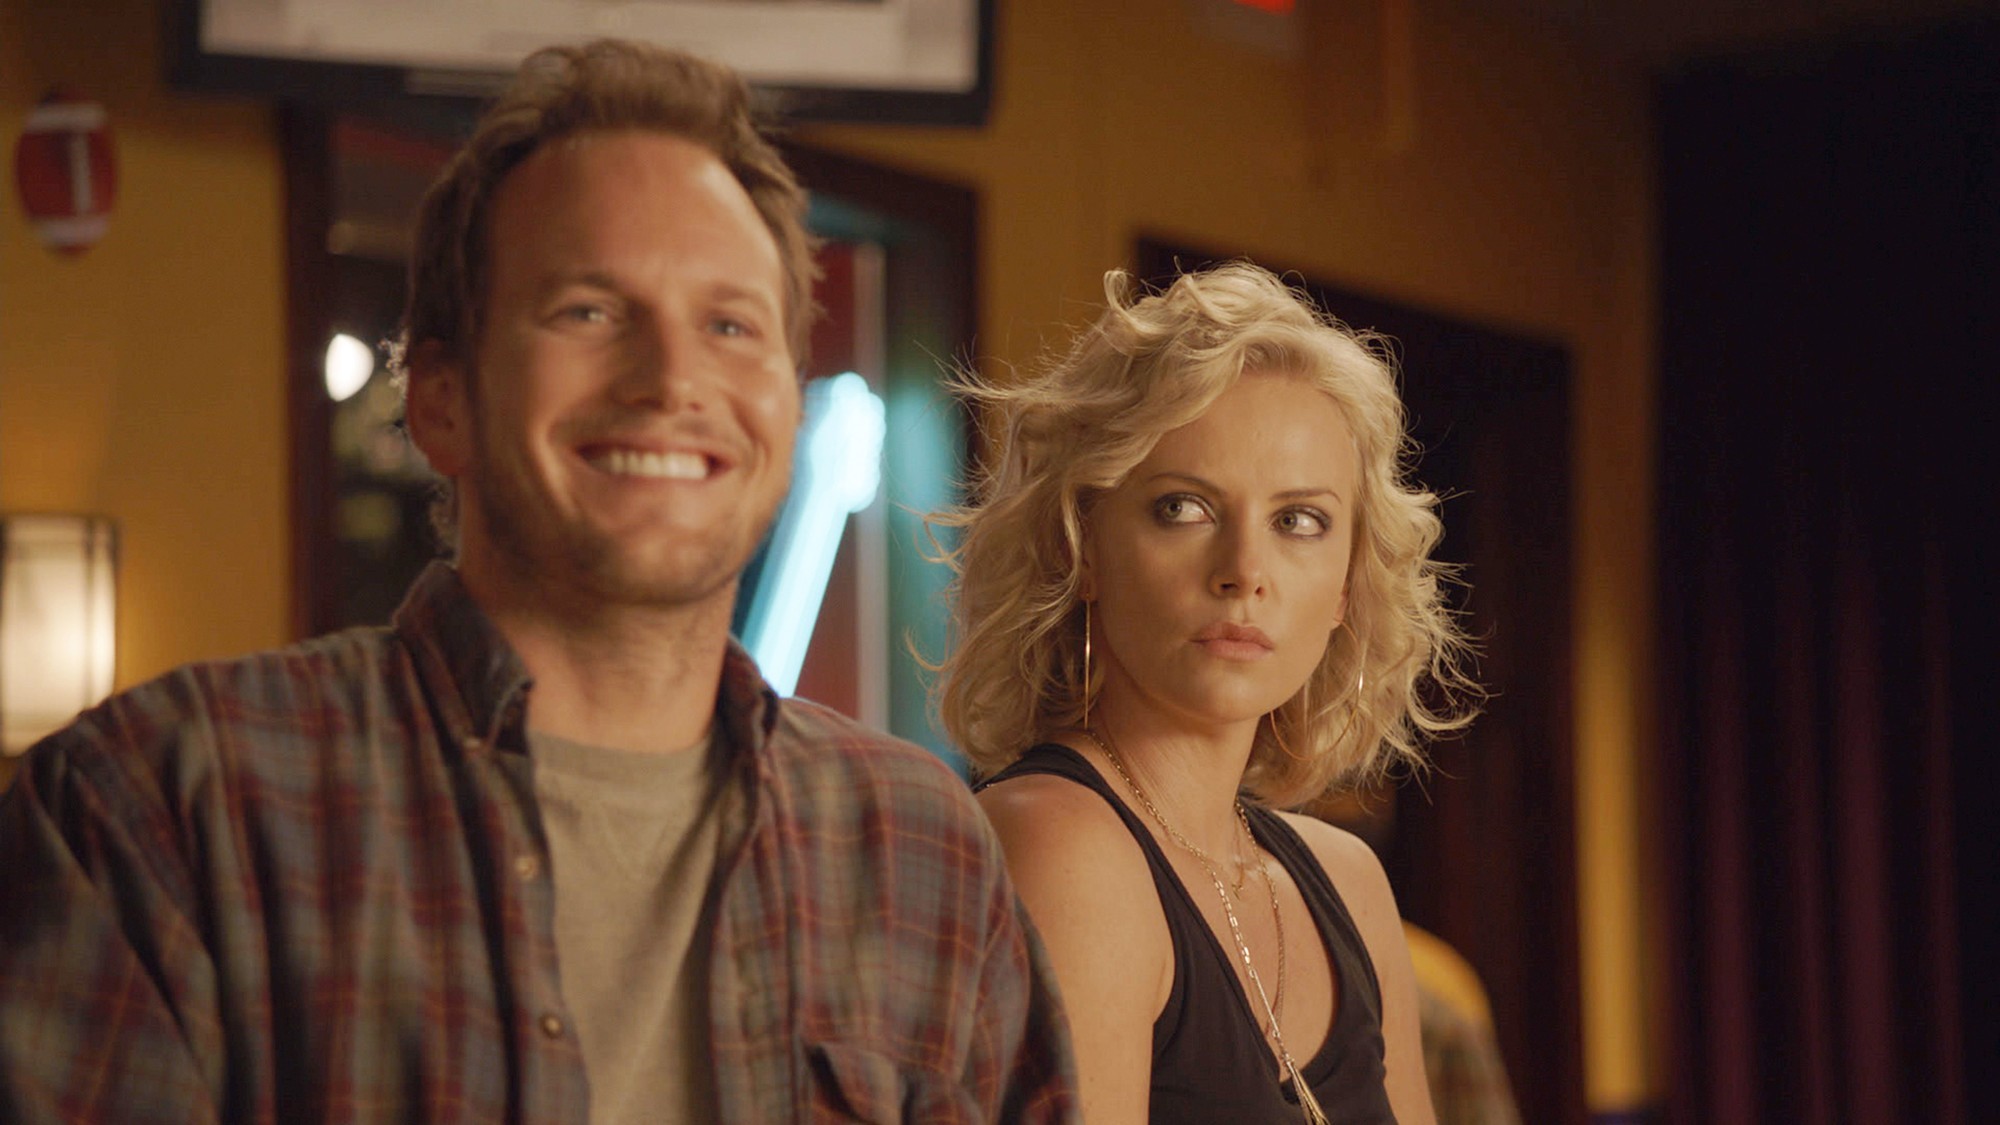 Patrick Wilson stars as Buddy Slade and Charlize Theron stars as Mavis Gary in Paramount Pictures' Young Adult (2011)